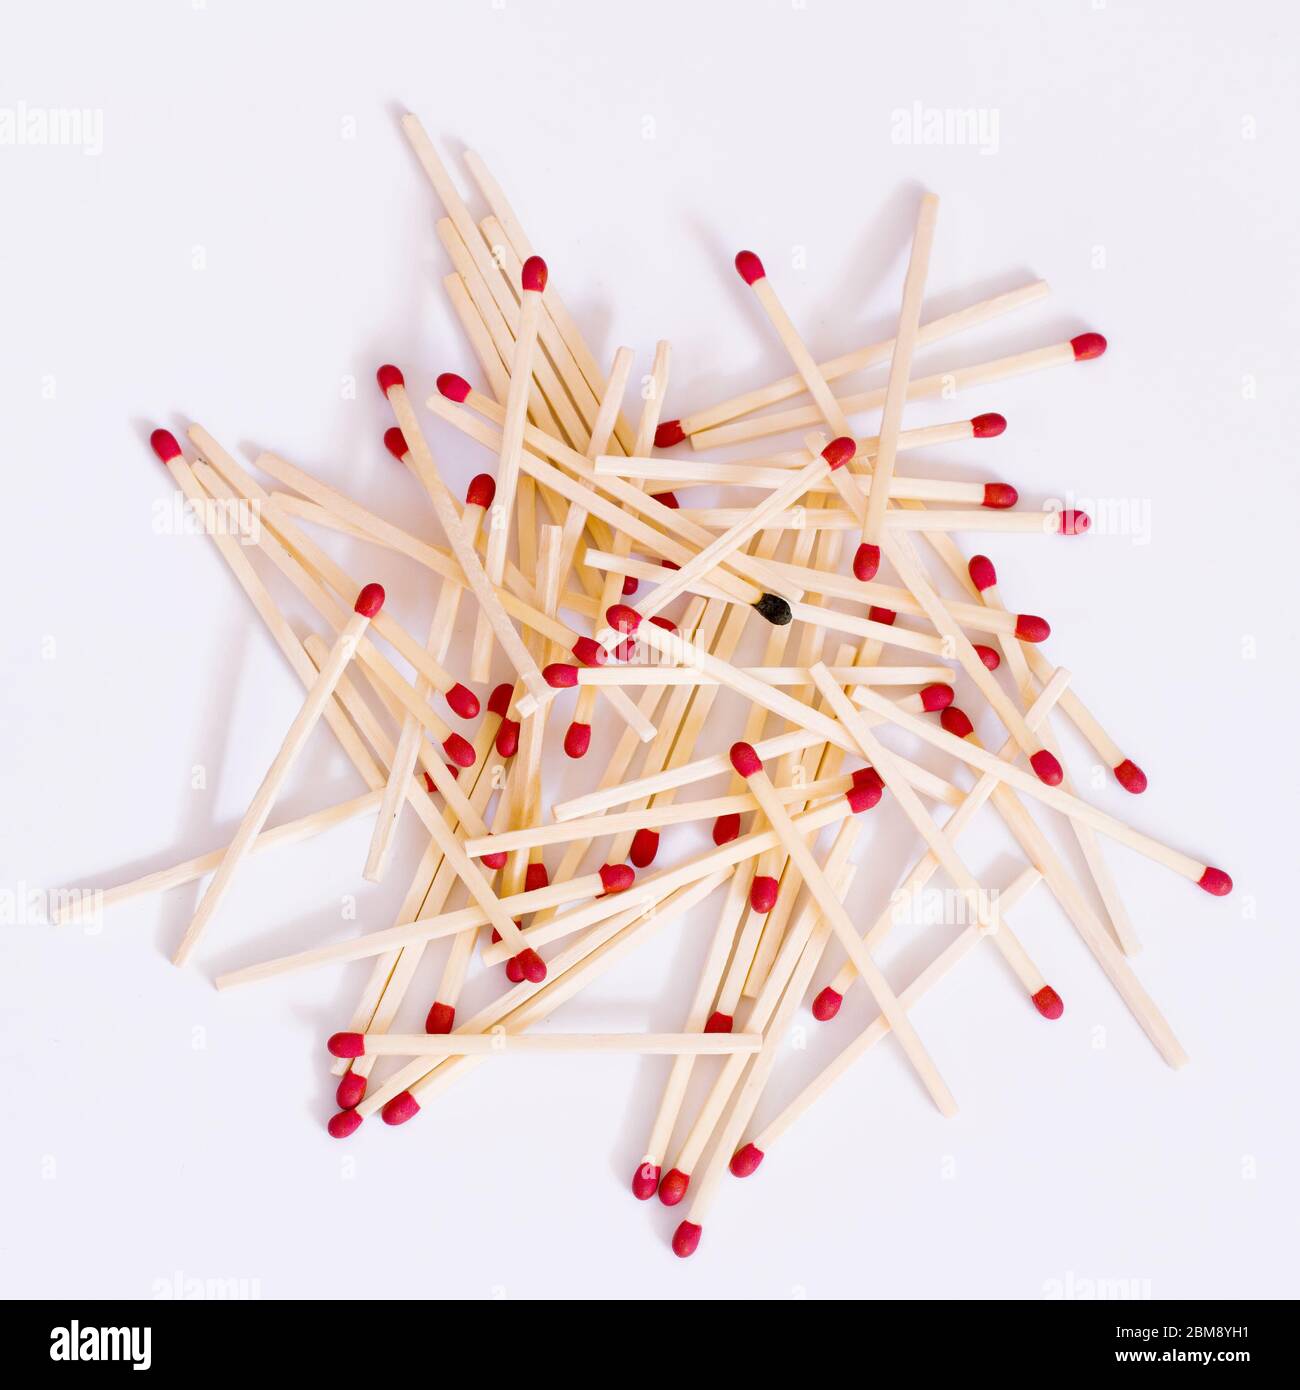 A single burnt match in a pile of matches Stock Photo